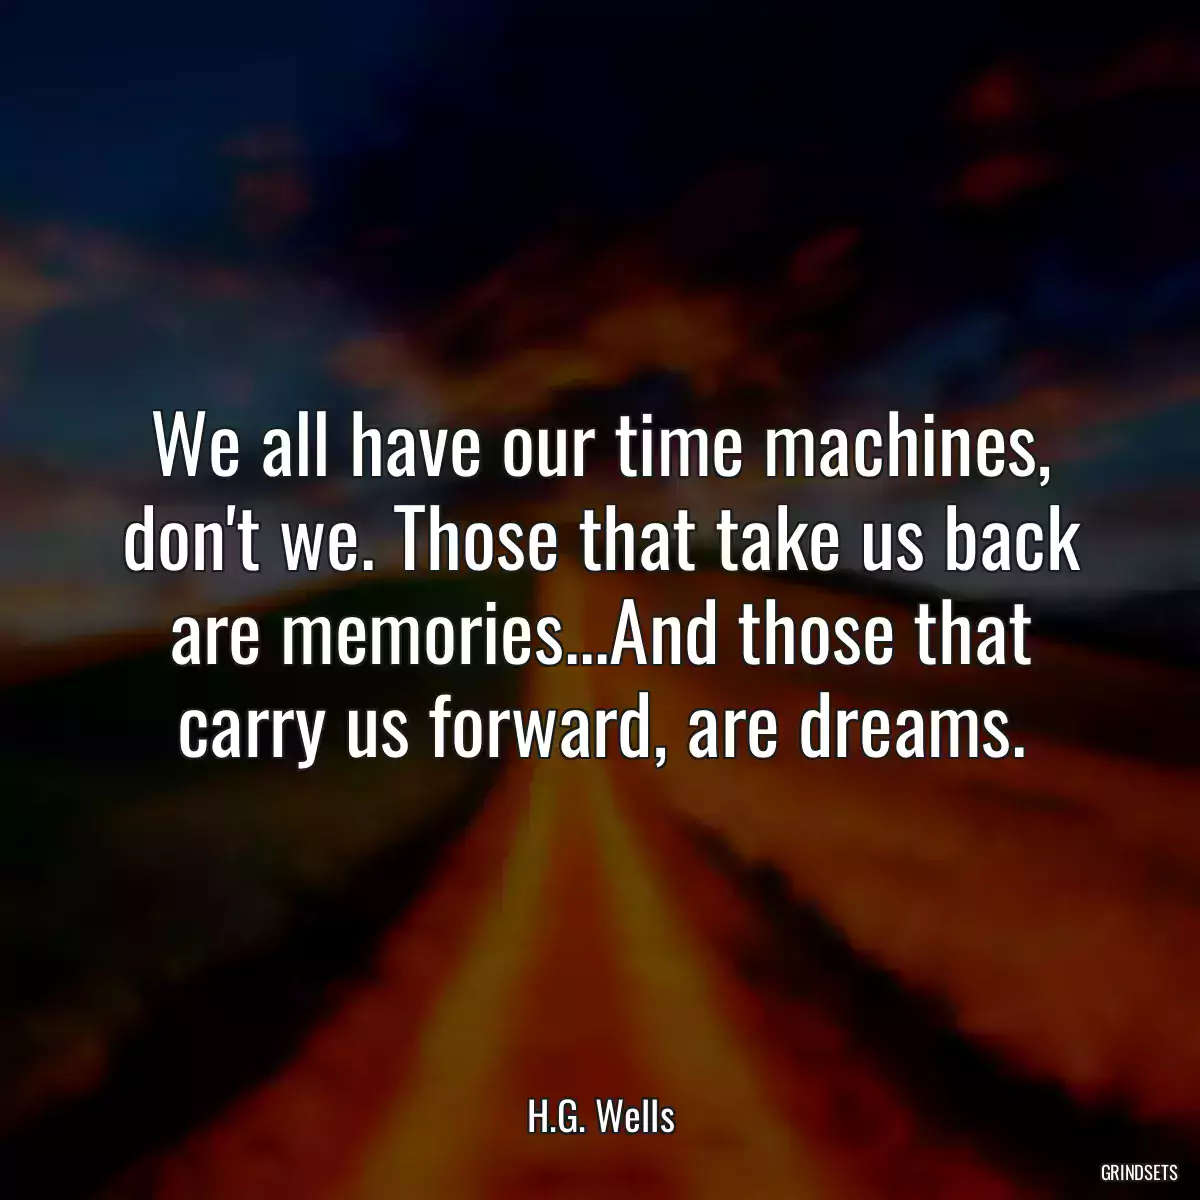 We all have our time machines, don\'t we. Those that take us back are memories...And those that carry us forward, are dreams.